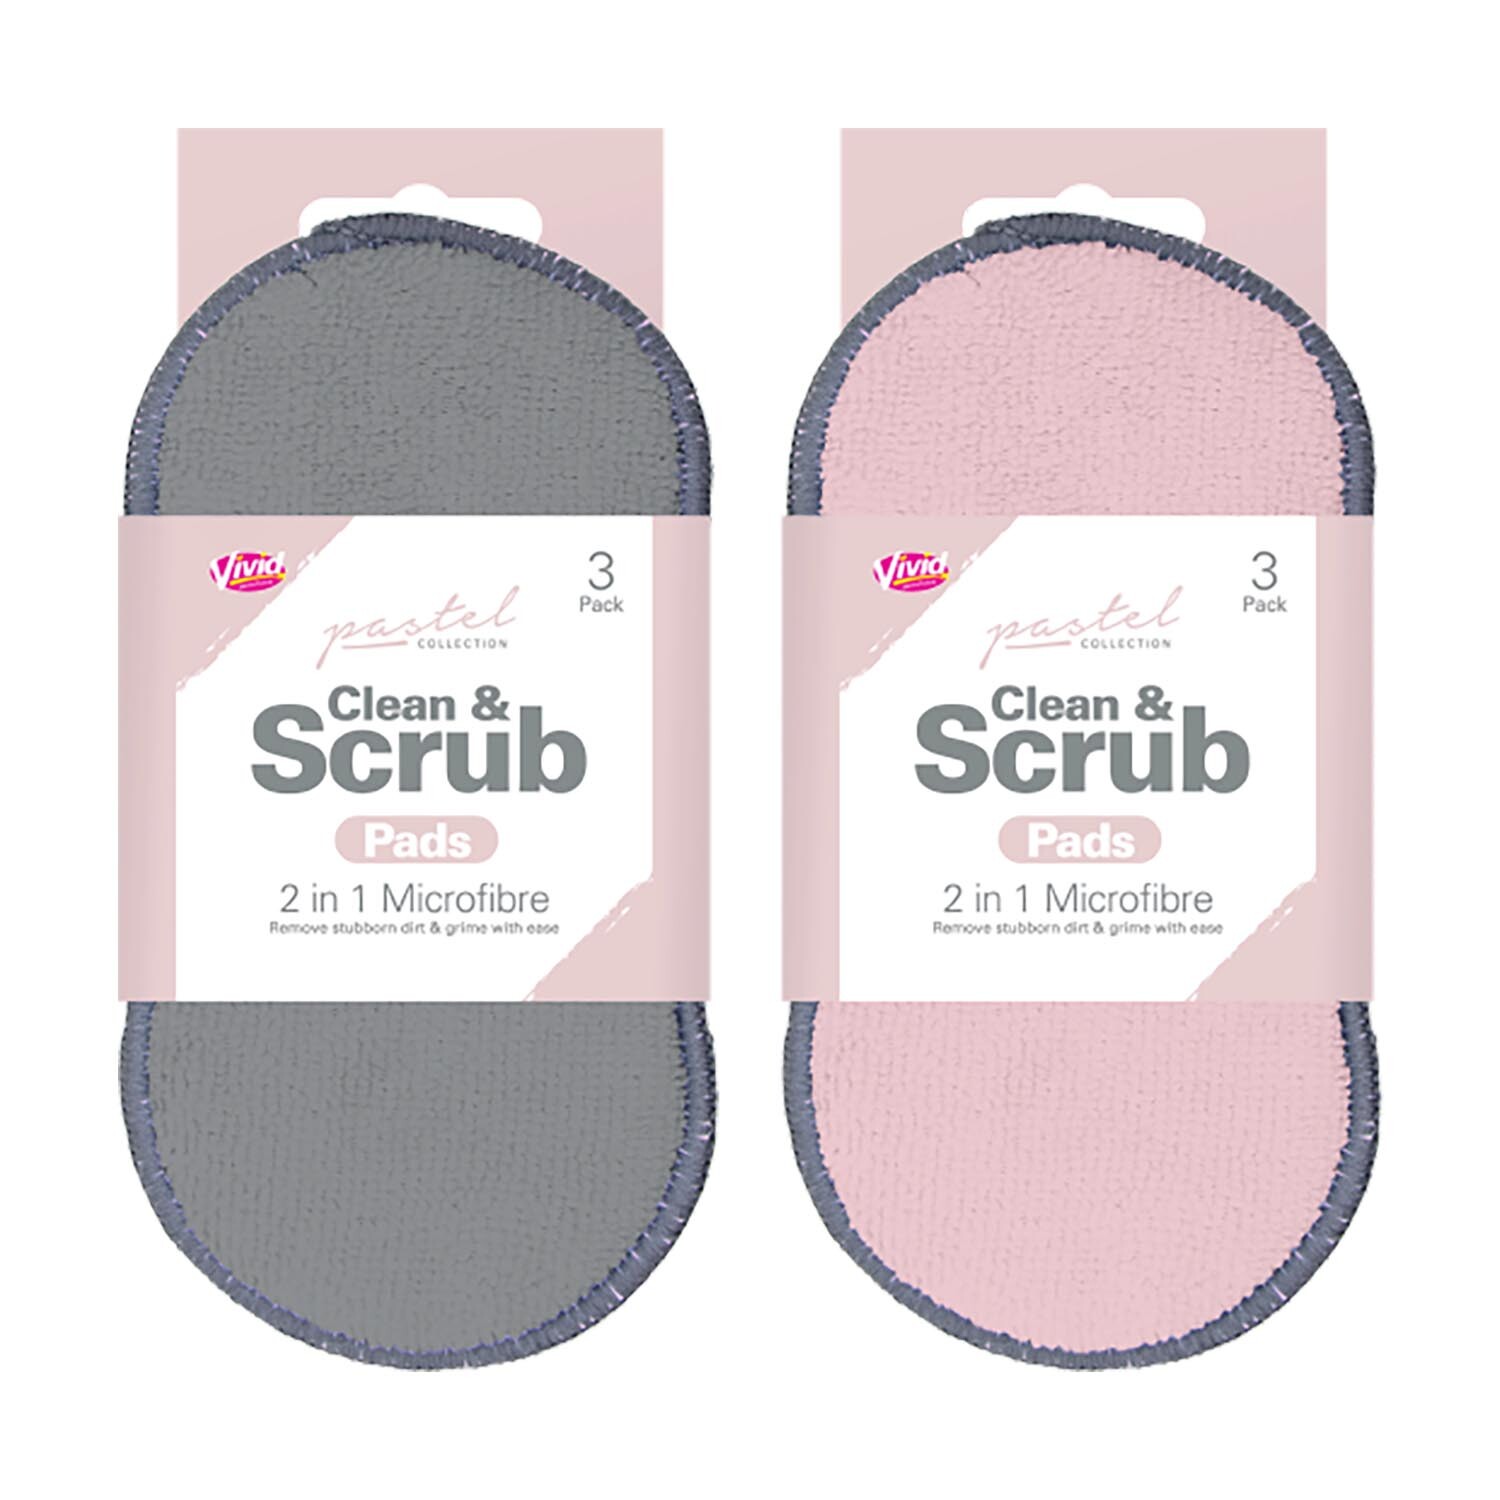 Pack of Three 2-in-1 Clean and Scrub Pads Image